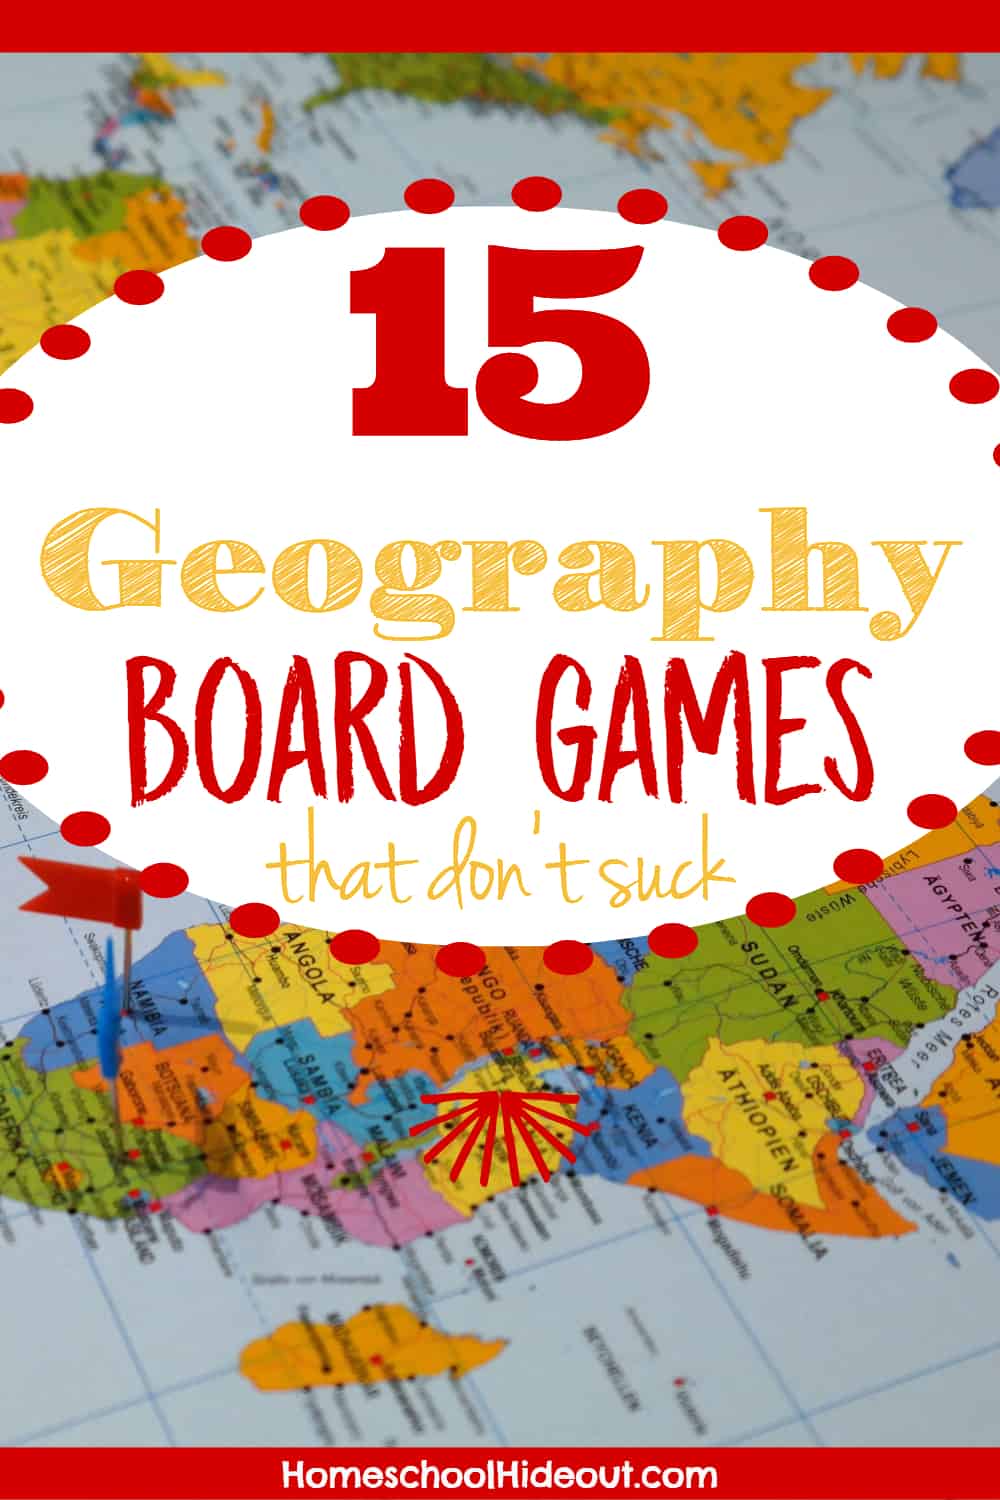 Review with the top 15 geography games! Need to brush up on your geography skills? We've got the top 15 geography board games that make learning locations, capitals and more a breeze! #geography #boardgames #familytime 